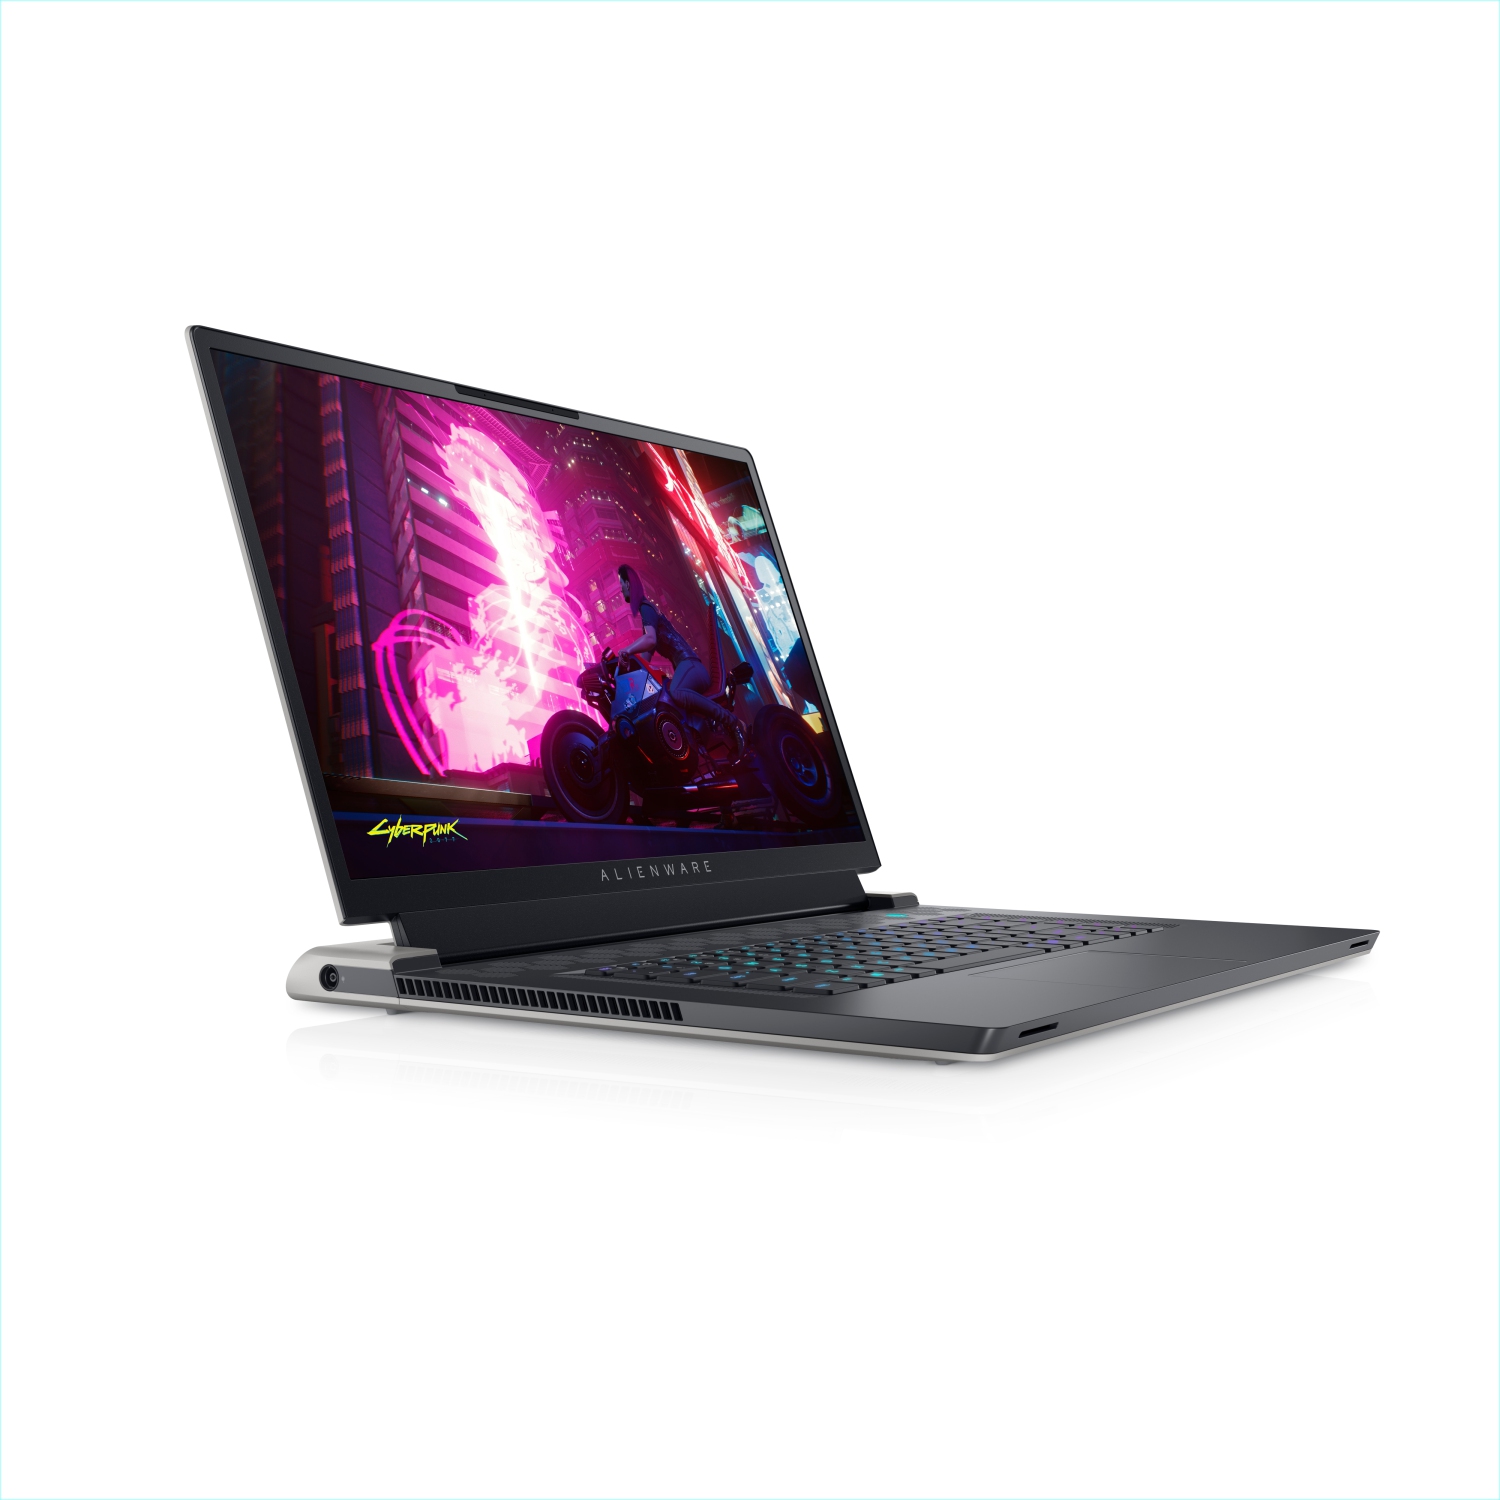 Refurbished (Excellent) – Dell Alienware X17 R1 Gaming Laptop (2021) | 17.3" FHD | Core i7 - 1TB SSD - 64GB RAM - RTX 3060 | 8 Cores @ 4.6 GHz - 11th Gen CPU - 12GB GDDR6